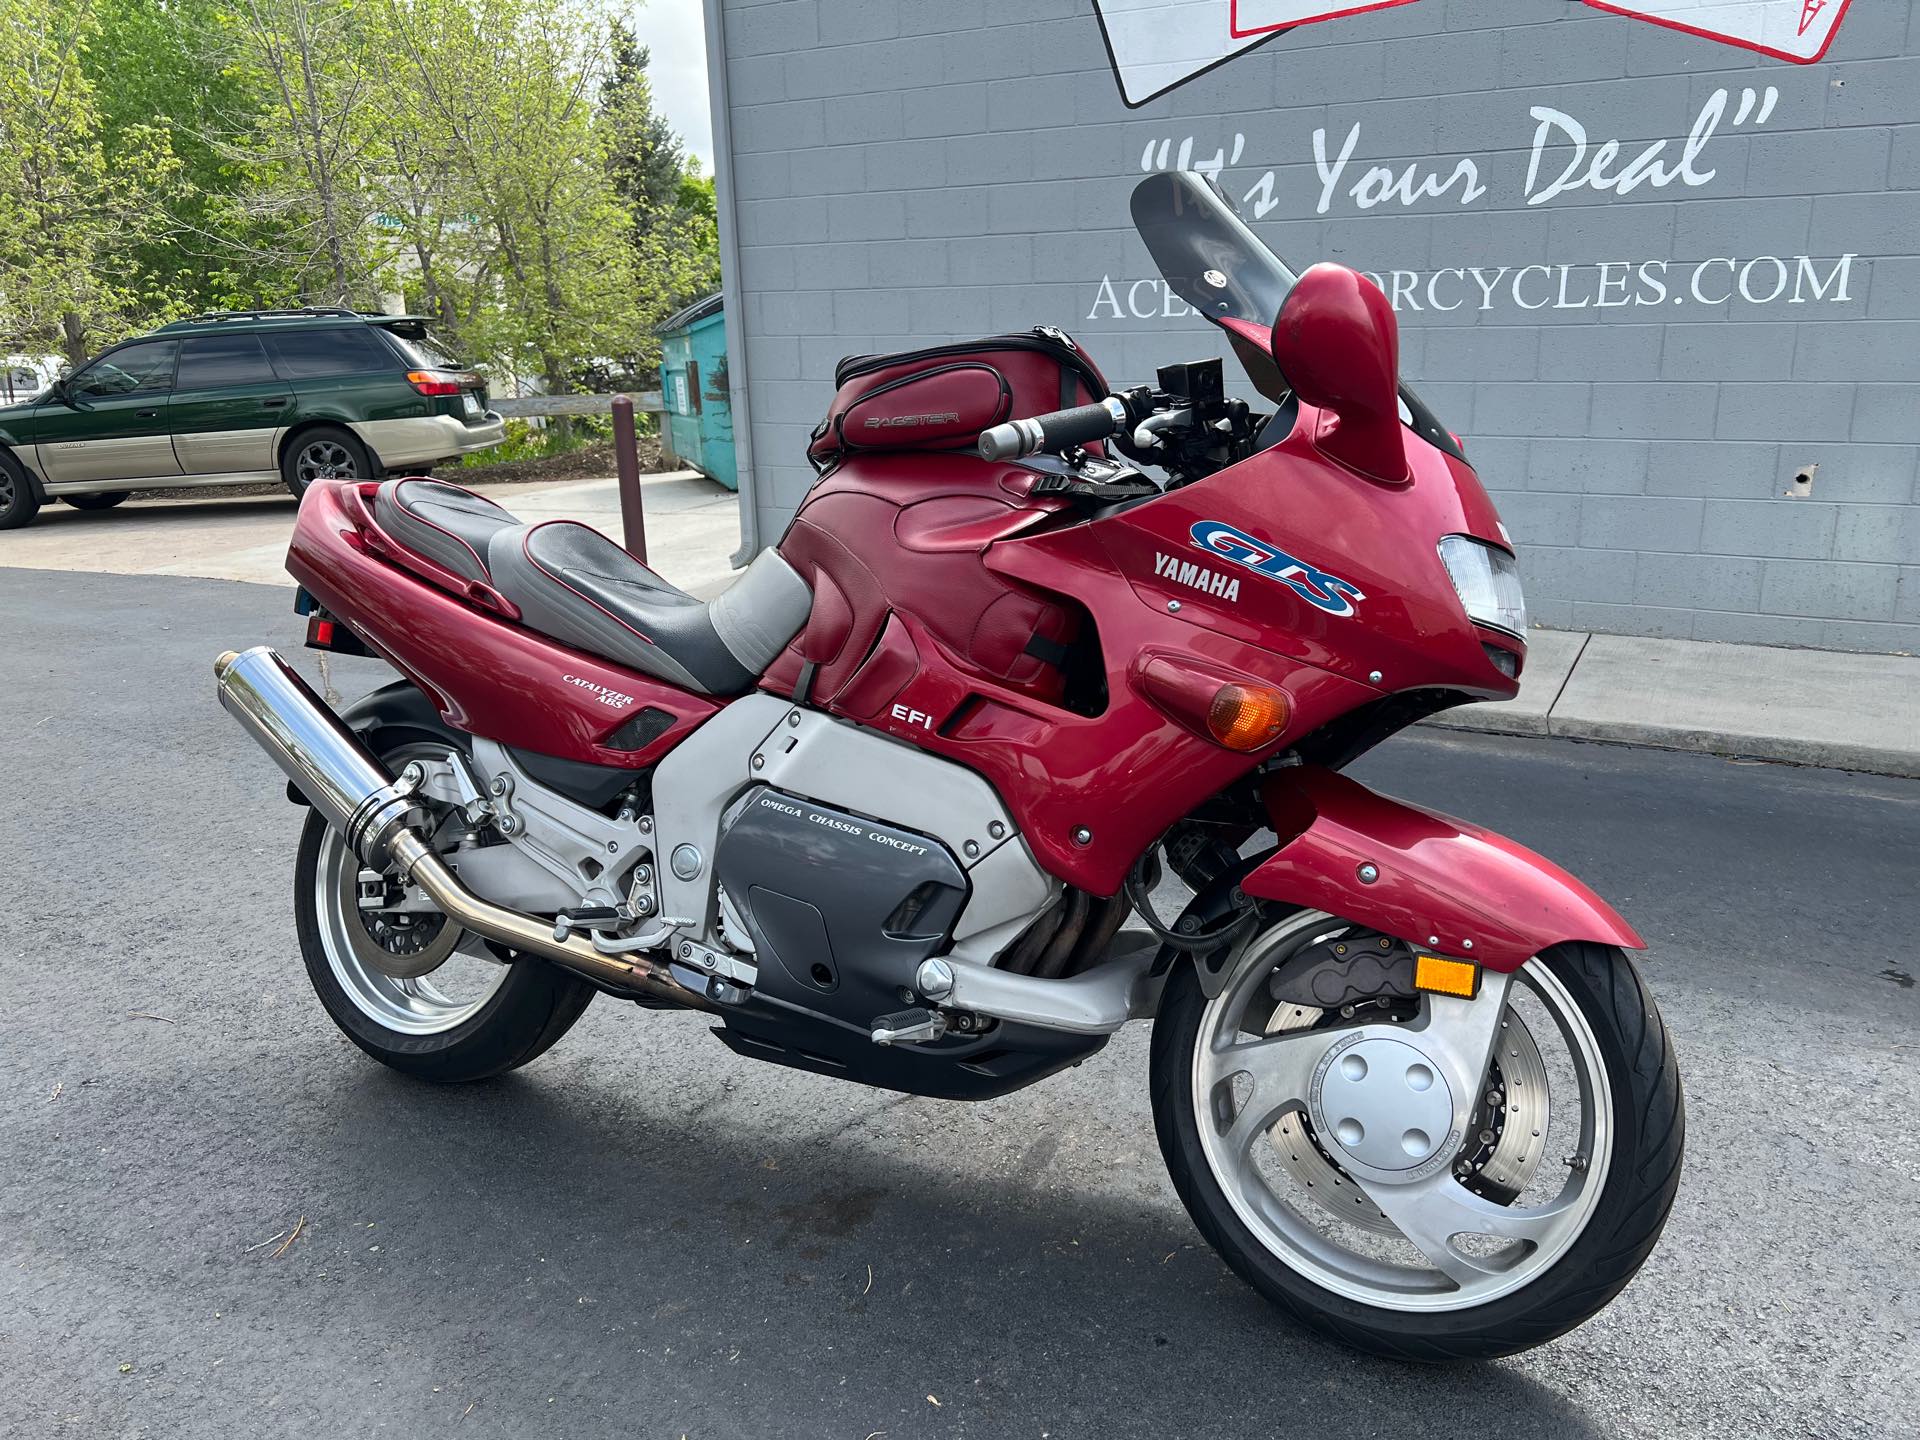 1993 YAMAHA GTS-1000 at Aces Motorcycles - Fort Collins